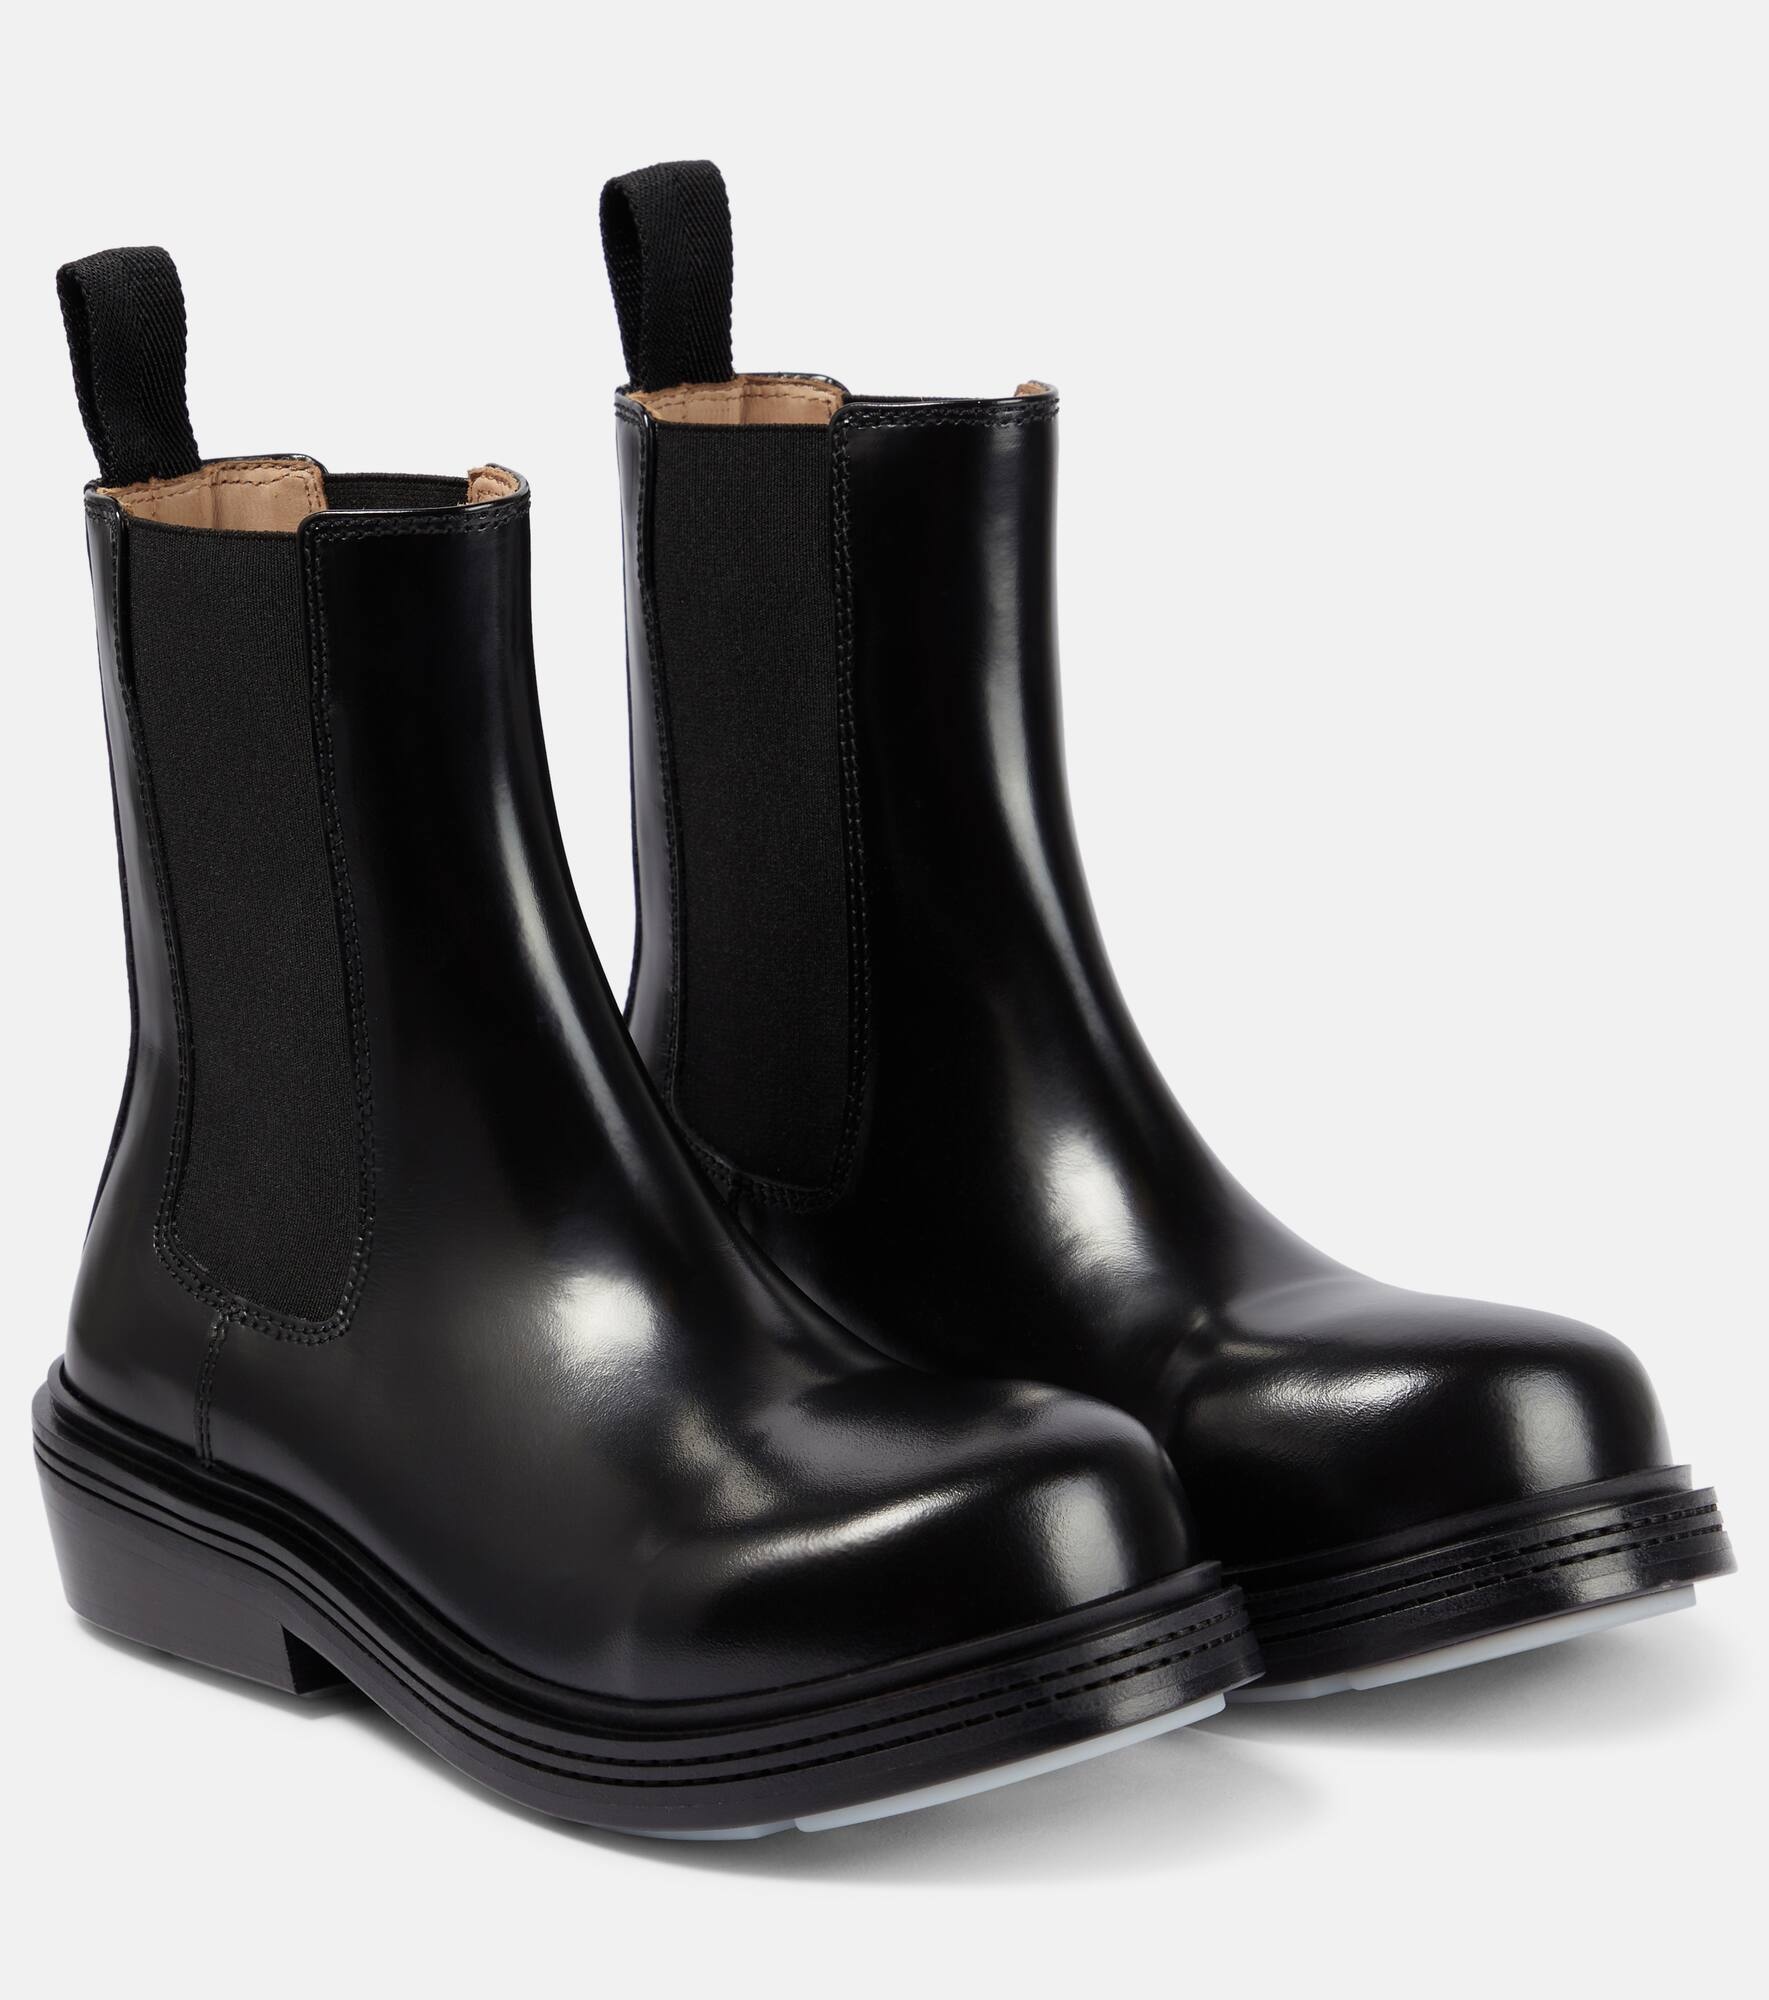 Leather Chelsea boots - 1